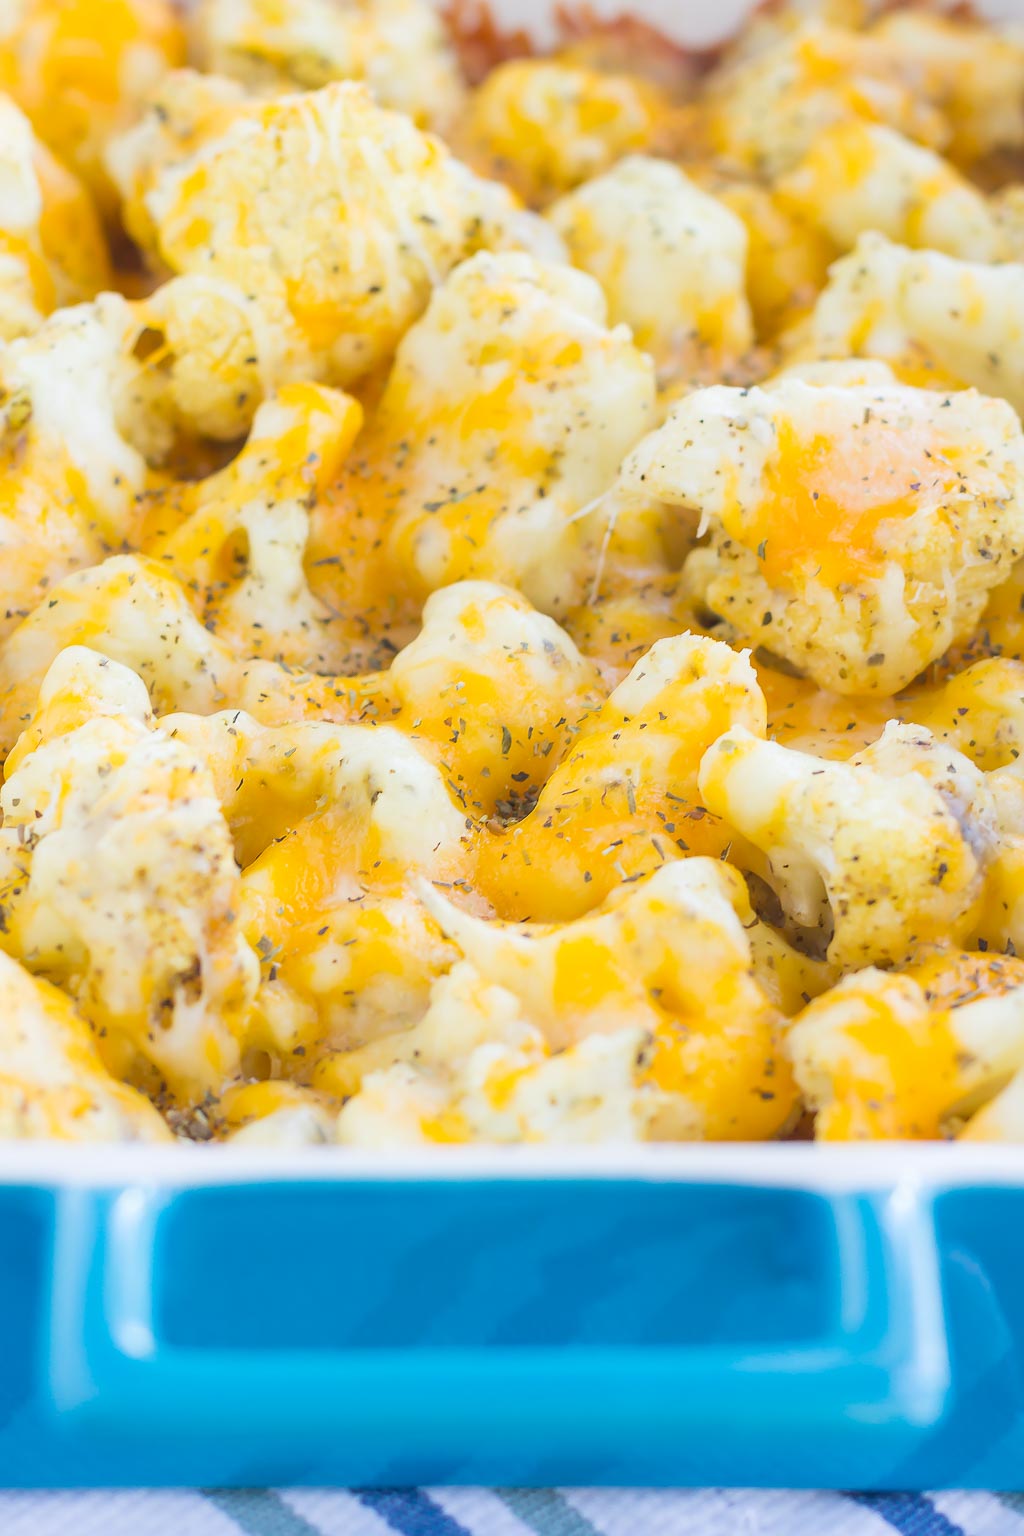 This Baked Cheesy Cauliflower is delicious way to jazz up your favorite veggie. Cauliflower florets are drizzled with olive oil, a blend of seasonings, and topped with two kinds of cheese. Baked until tender and oozing with flavor, this easy vegetable will quickly become a new mealtime favorite!